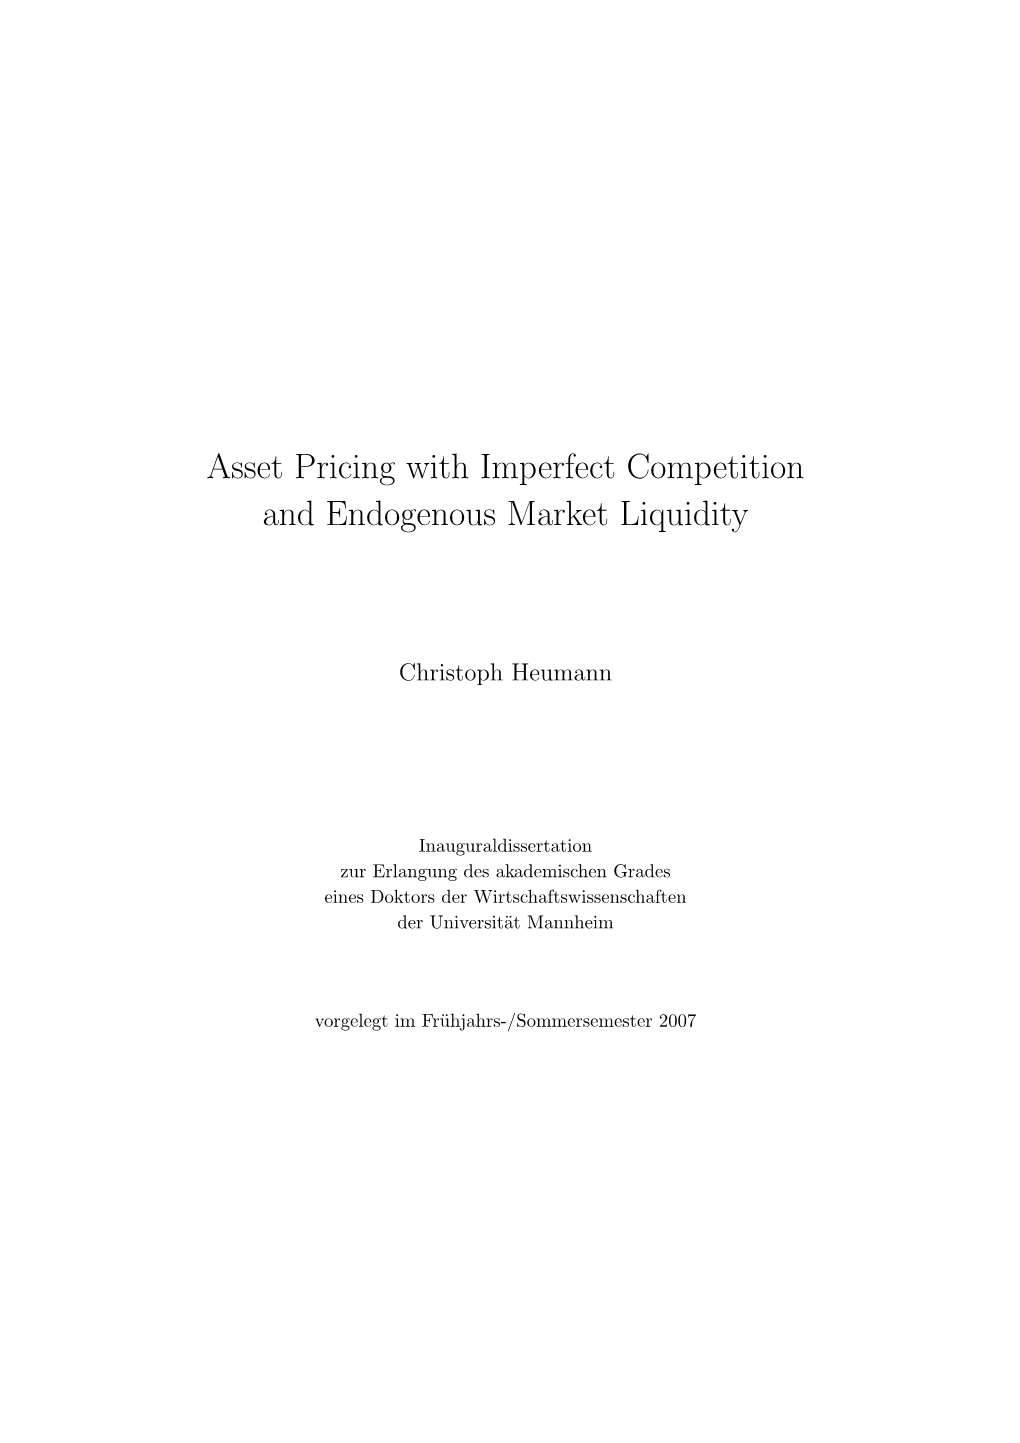 Asset Pricing with Imperfect Competition and Endogenous Market Liquidity